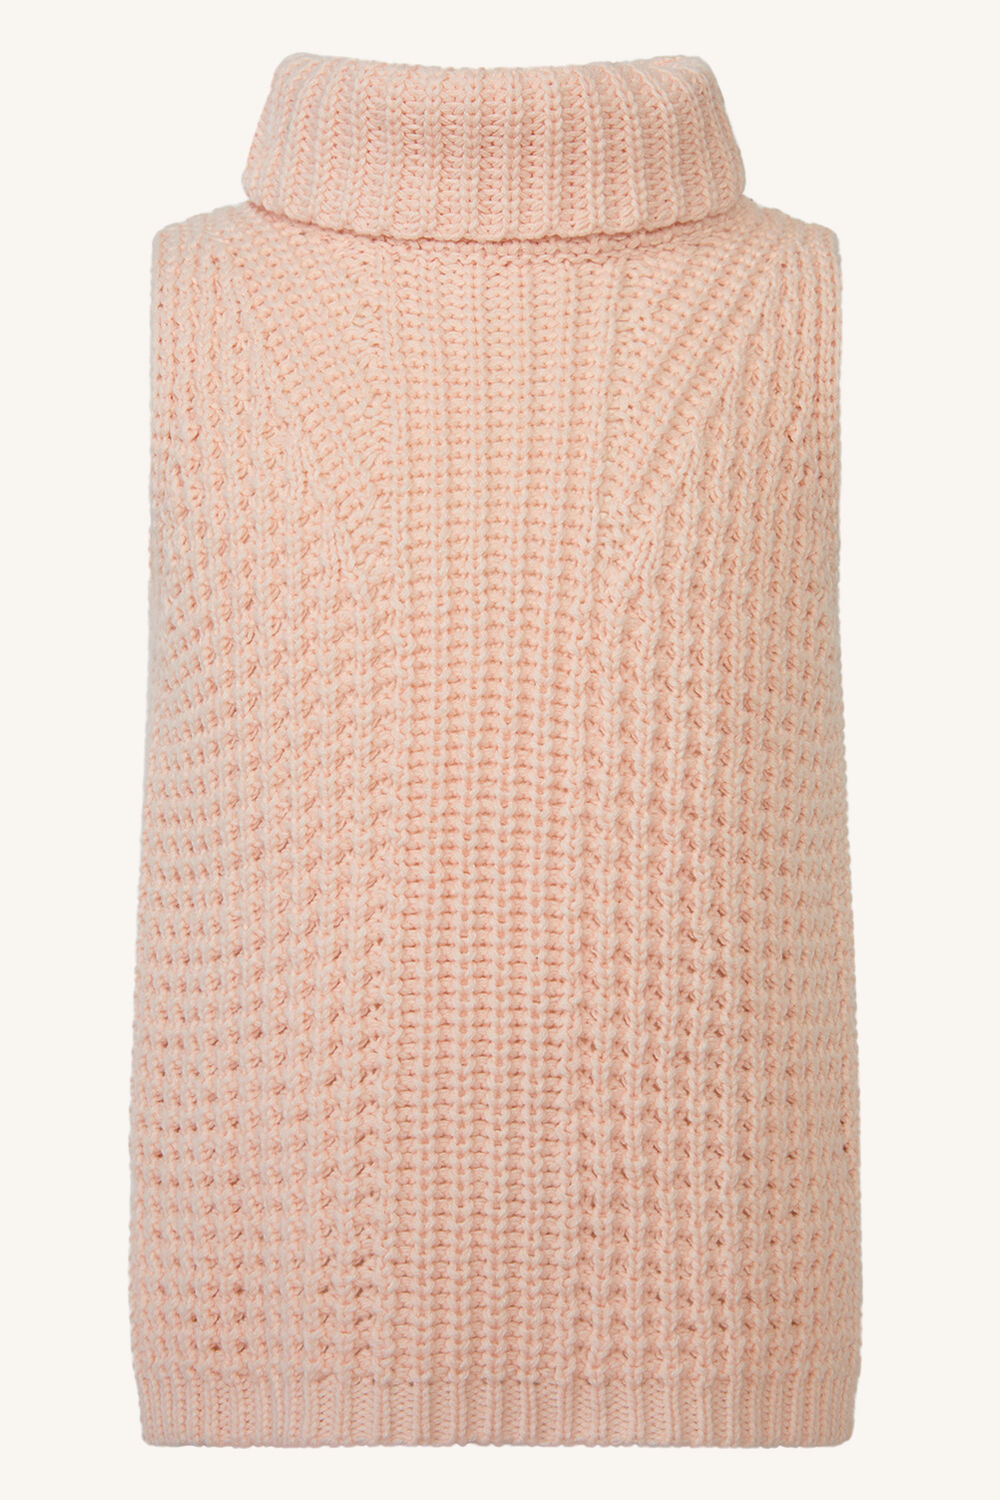 GIRLS HALO KNIT VEST in colour SOFT PINK